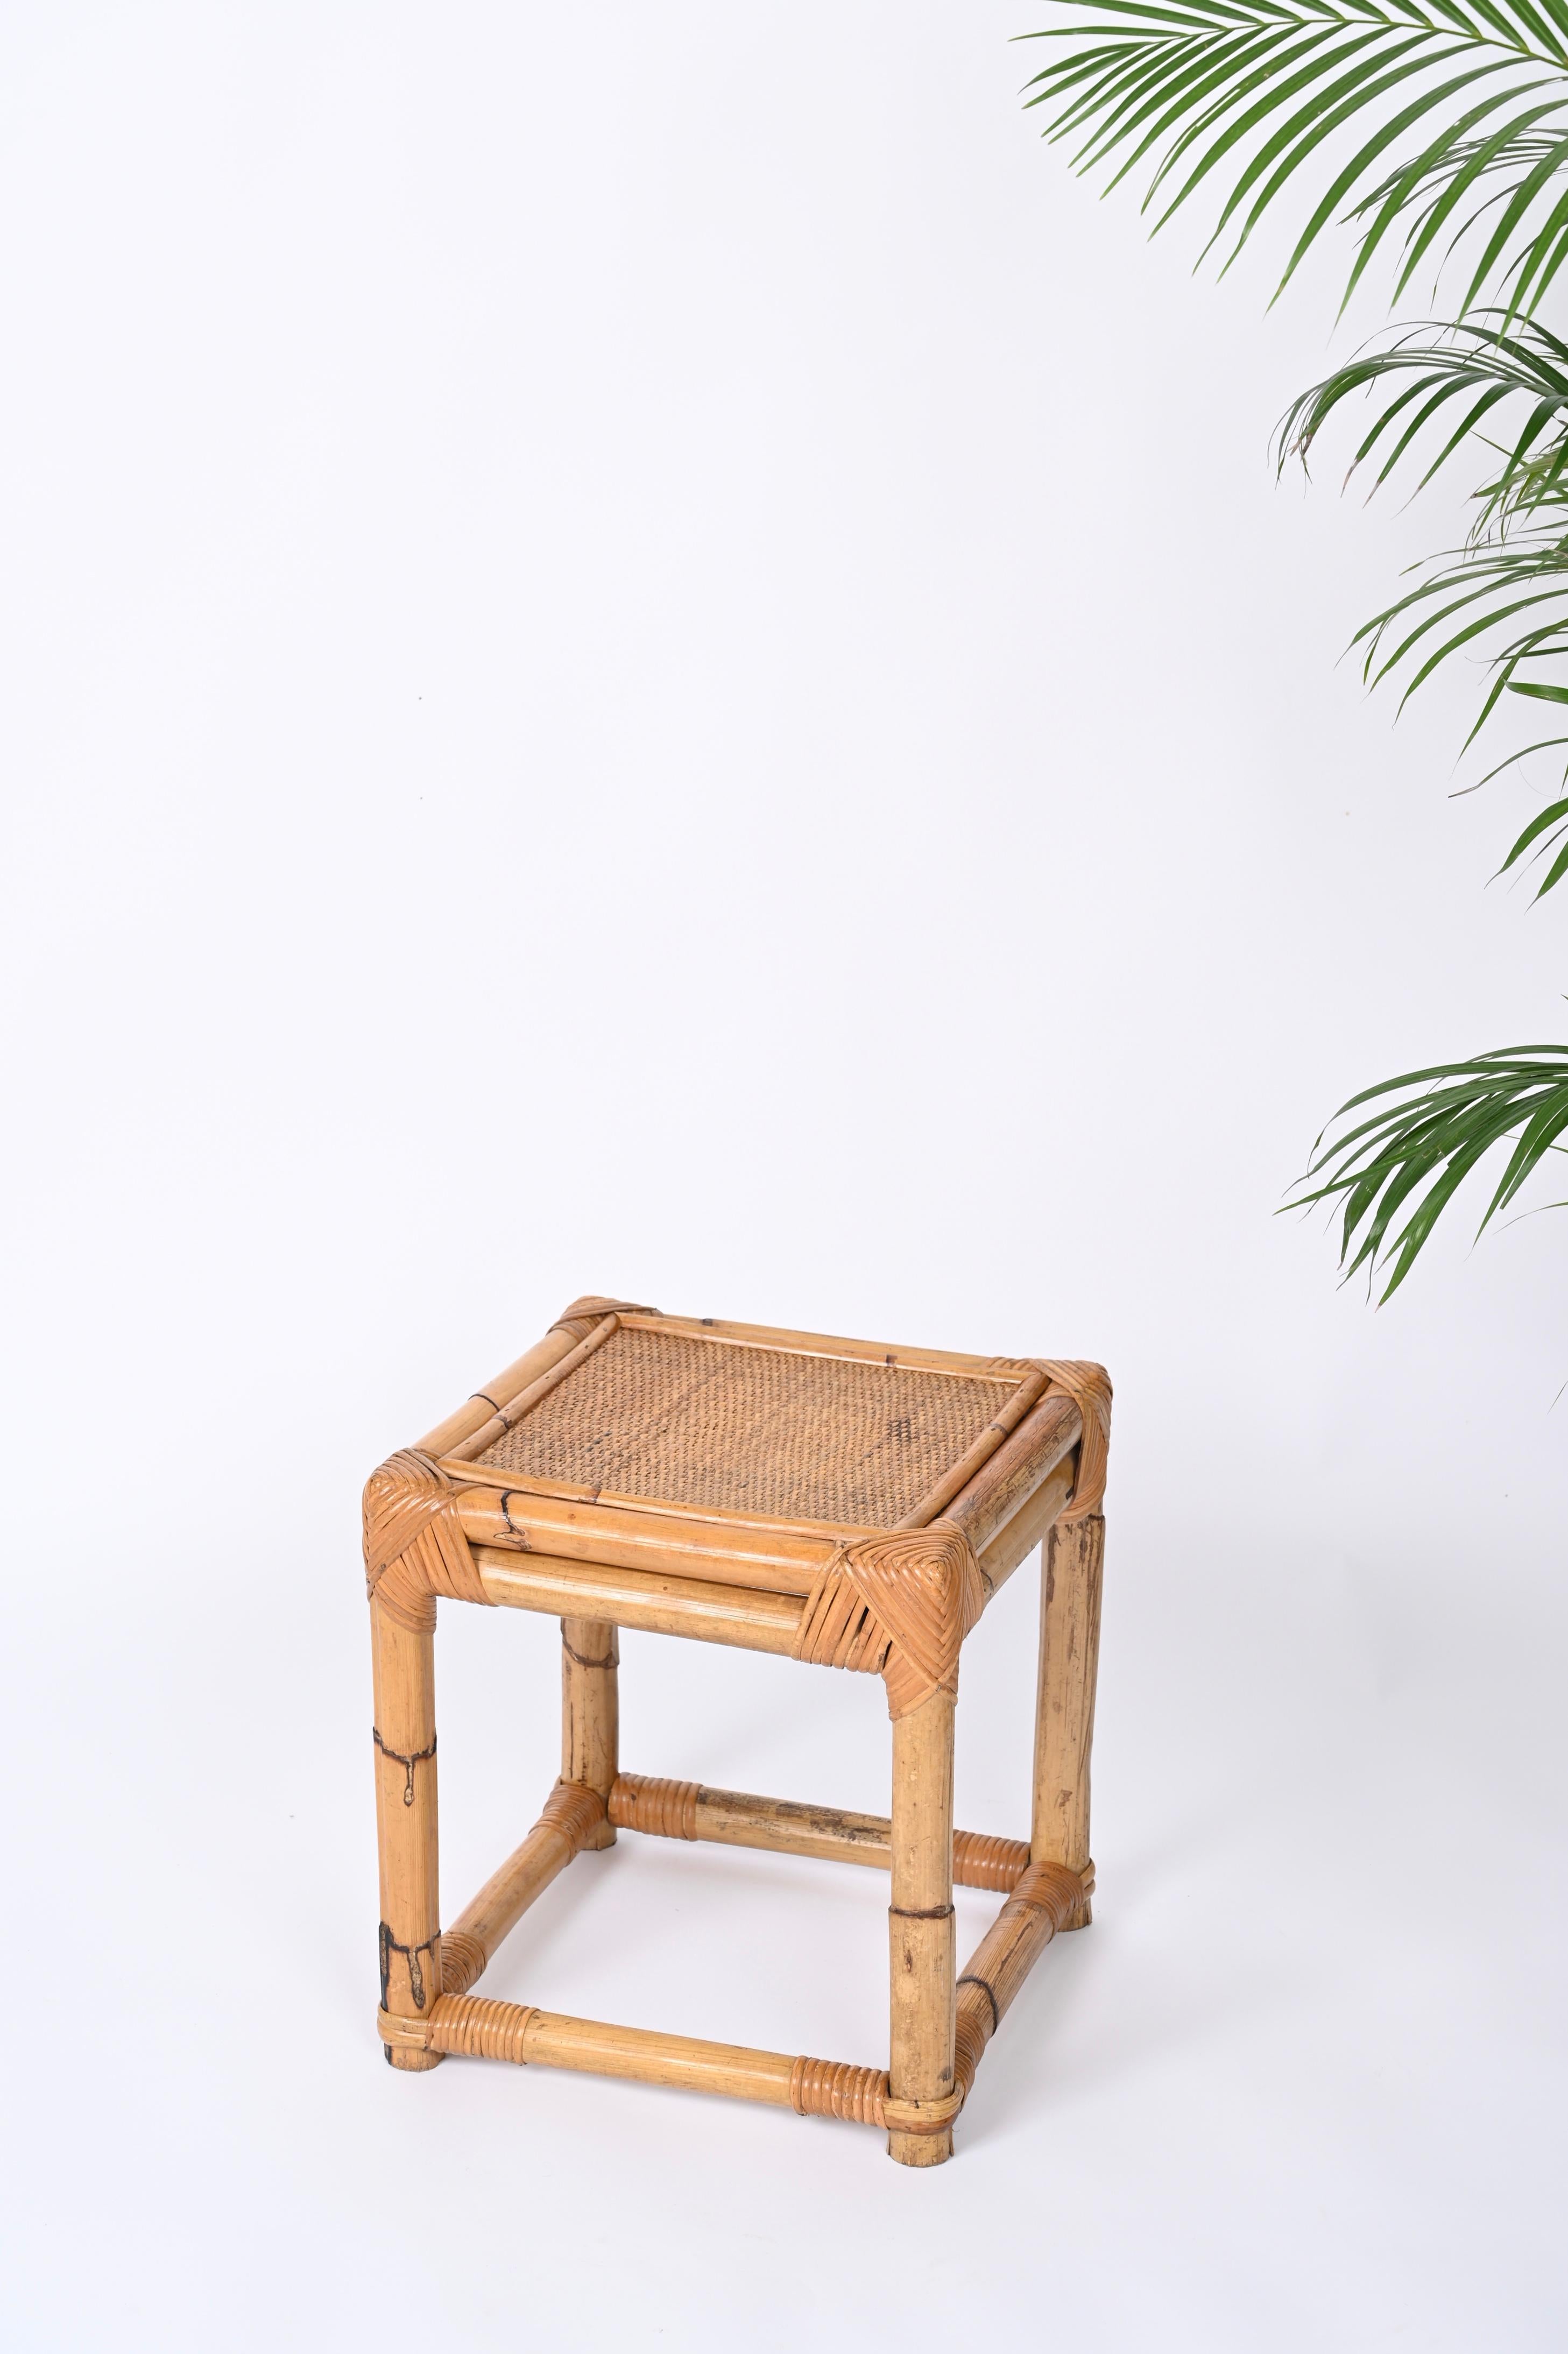 Italian Midcentury Cube Side Table or Pouf in Bamboo and Rattan, 1970s For Sale 3